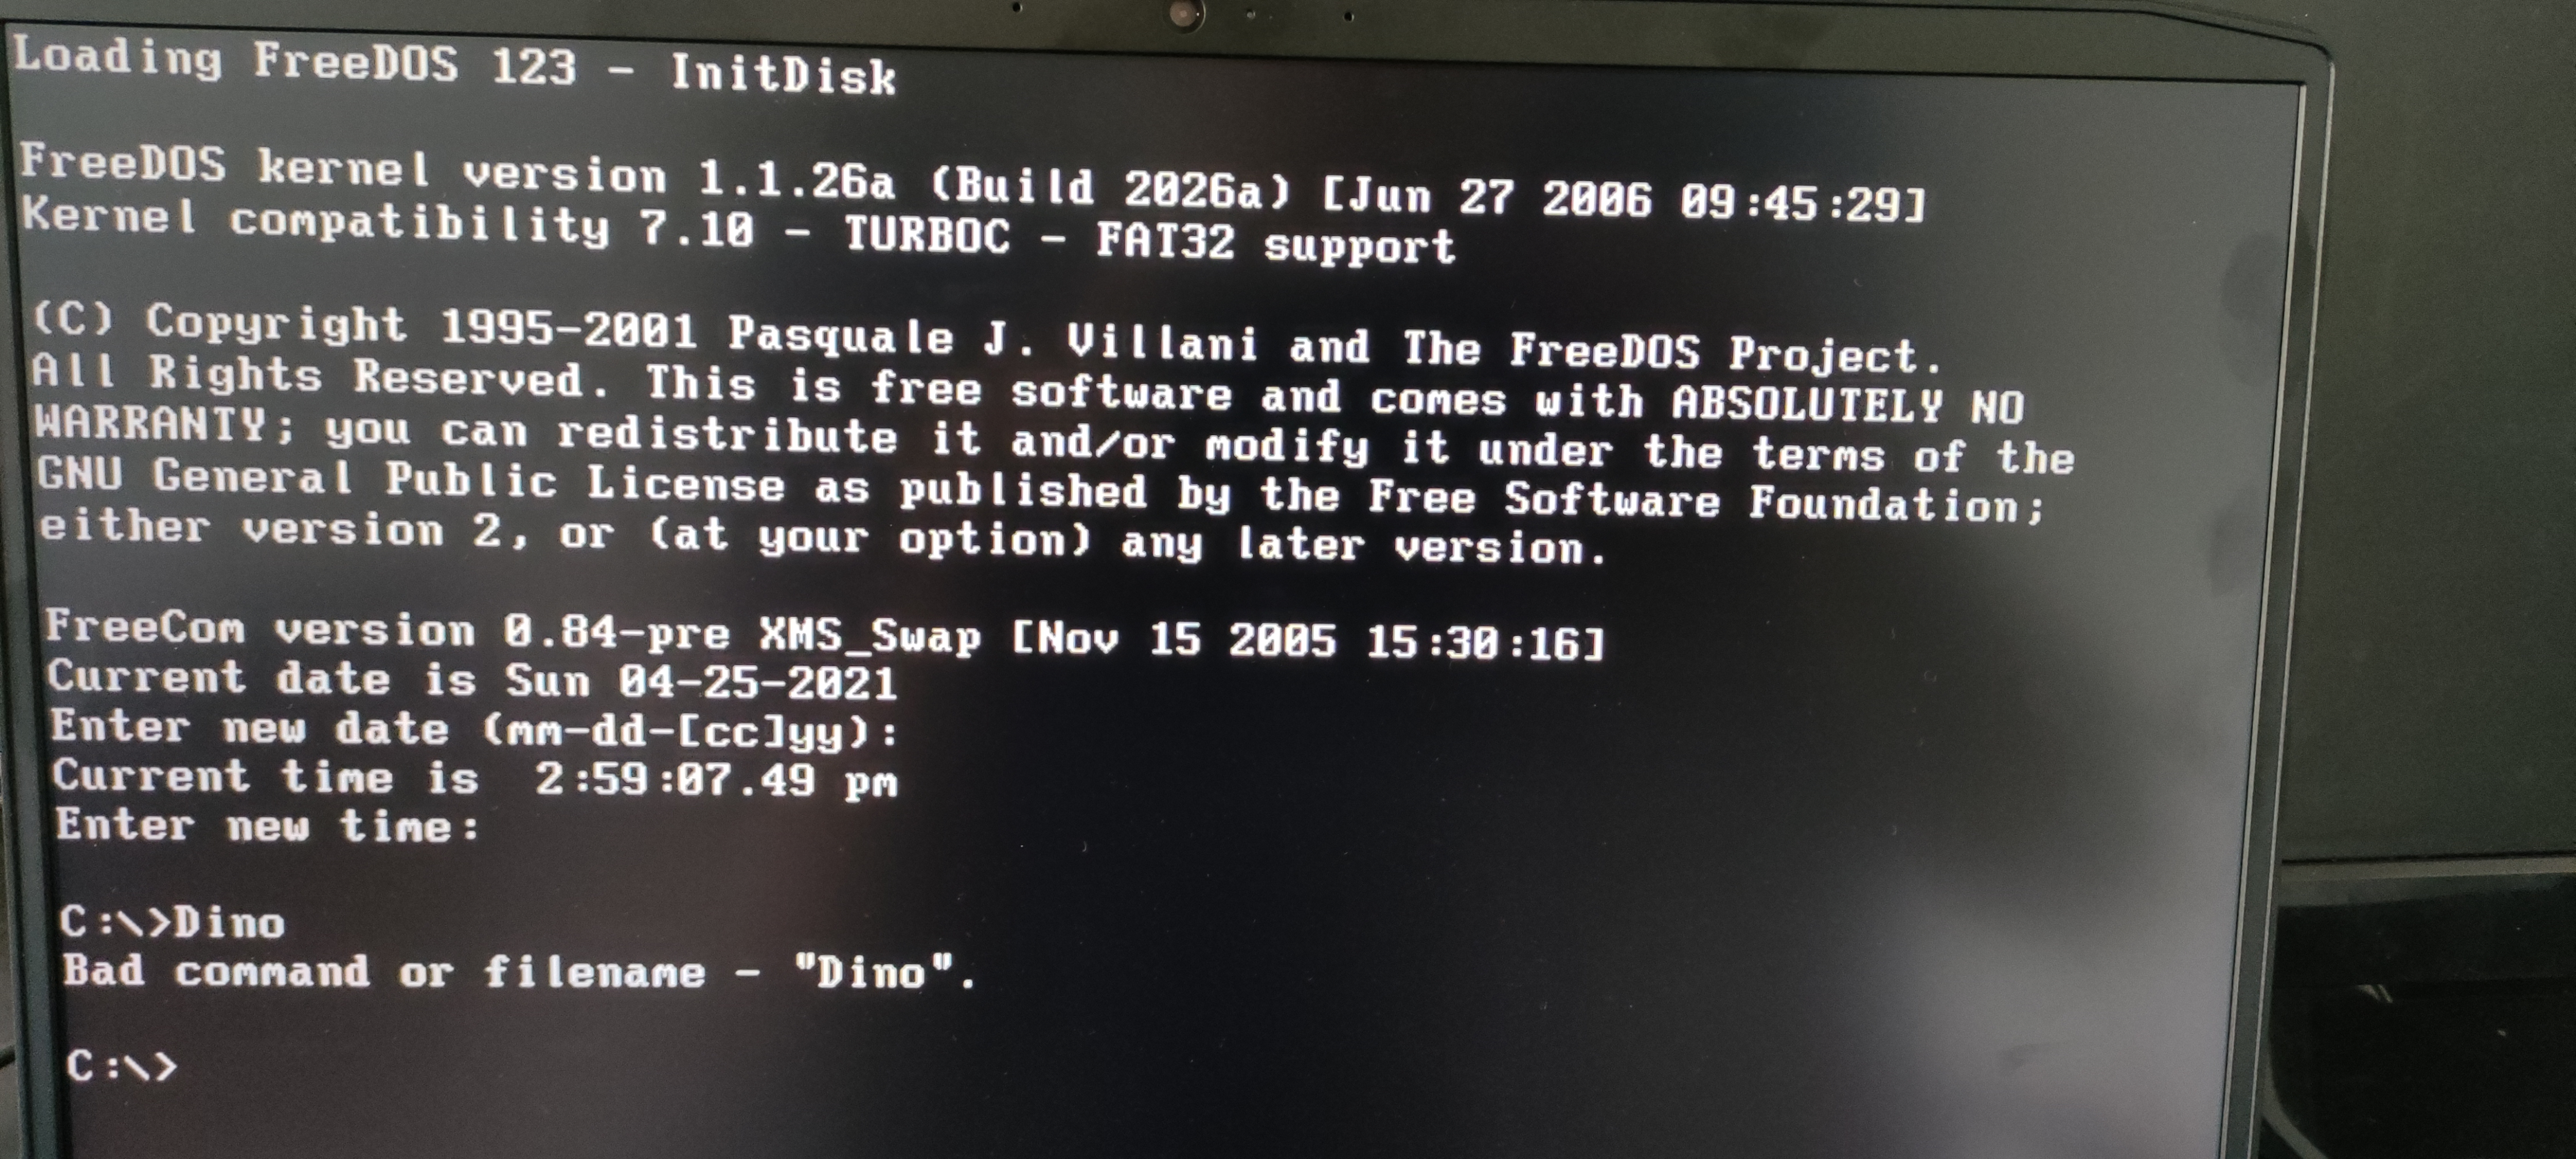 loading freedos no kernel sys home's windows 7